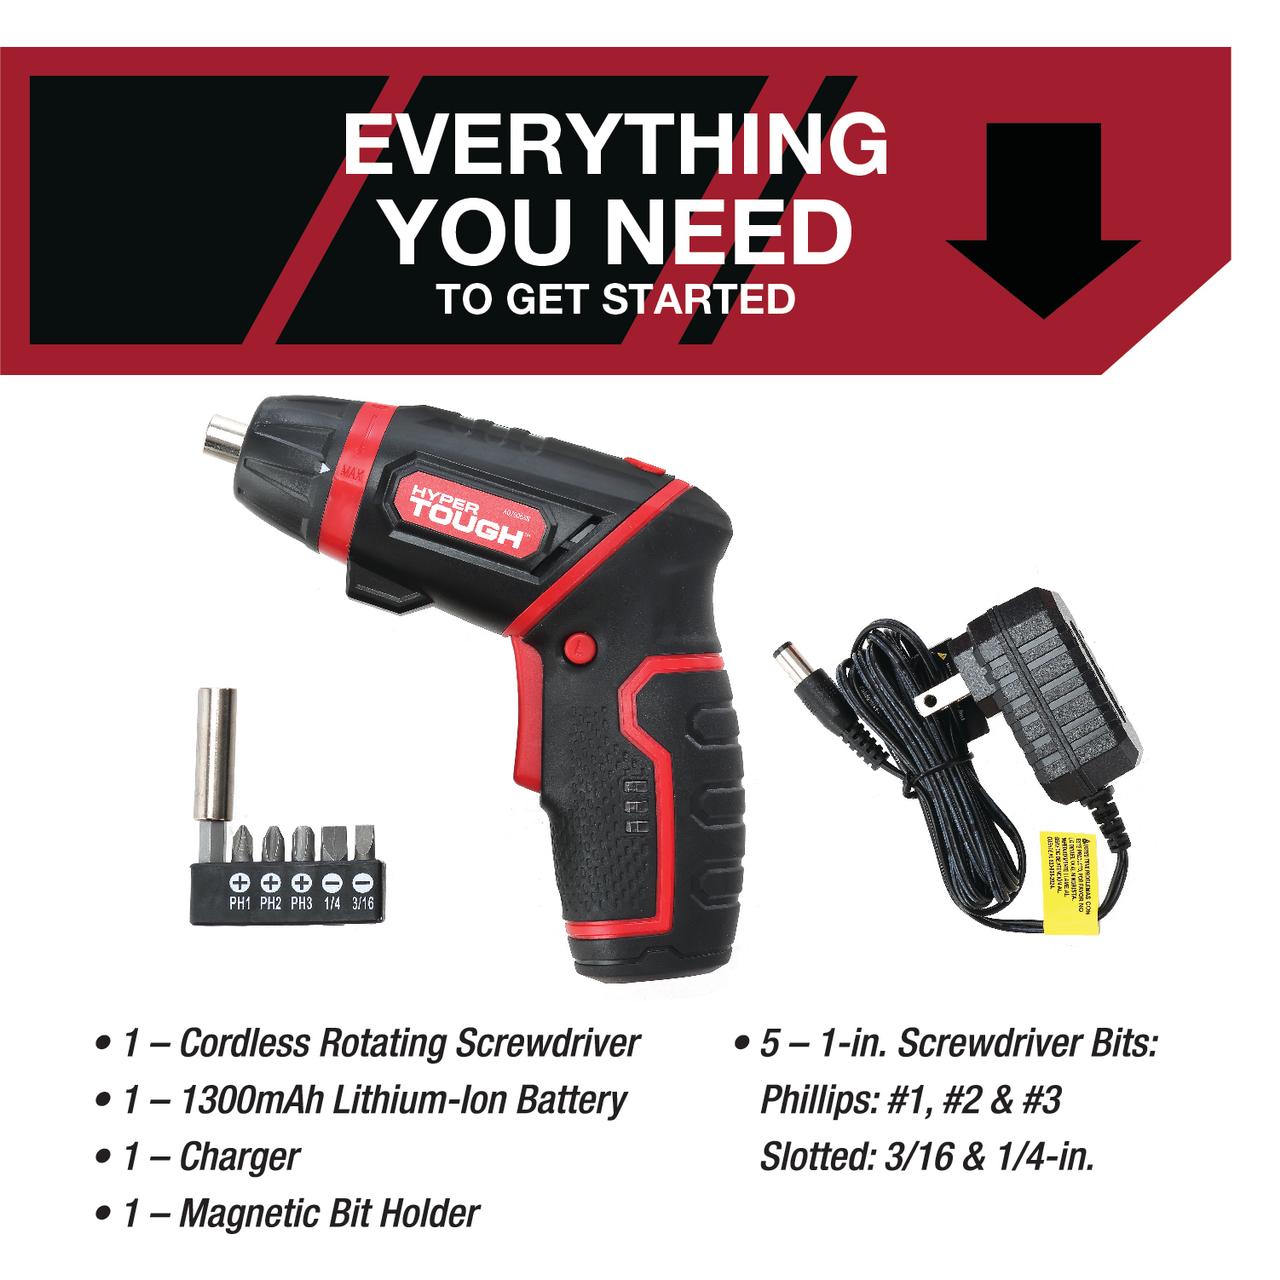 Hyper Tough 4V Max Lithium-Ion Cordless Rotating Power Screwdriver 1/4 inch Size with Charger, Rotating Handle, LED Light, Magnetic Bit Holder & Bits - image 2 of 18